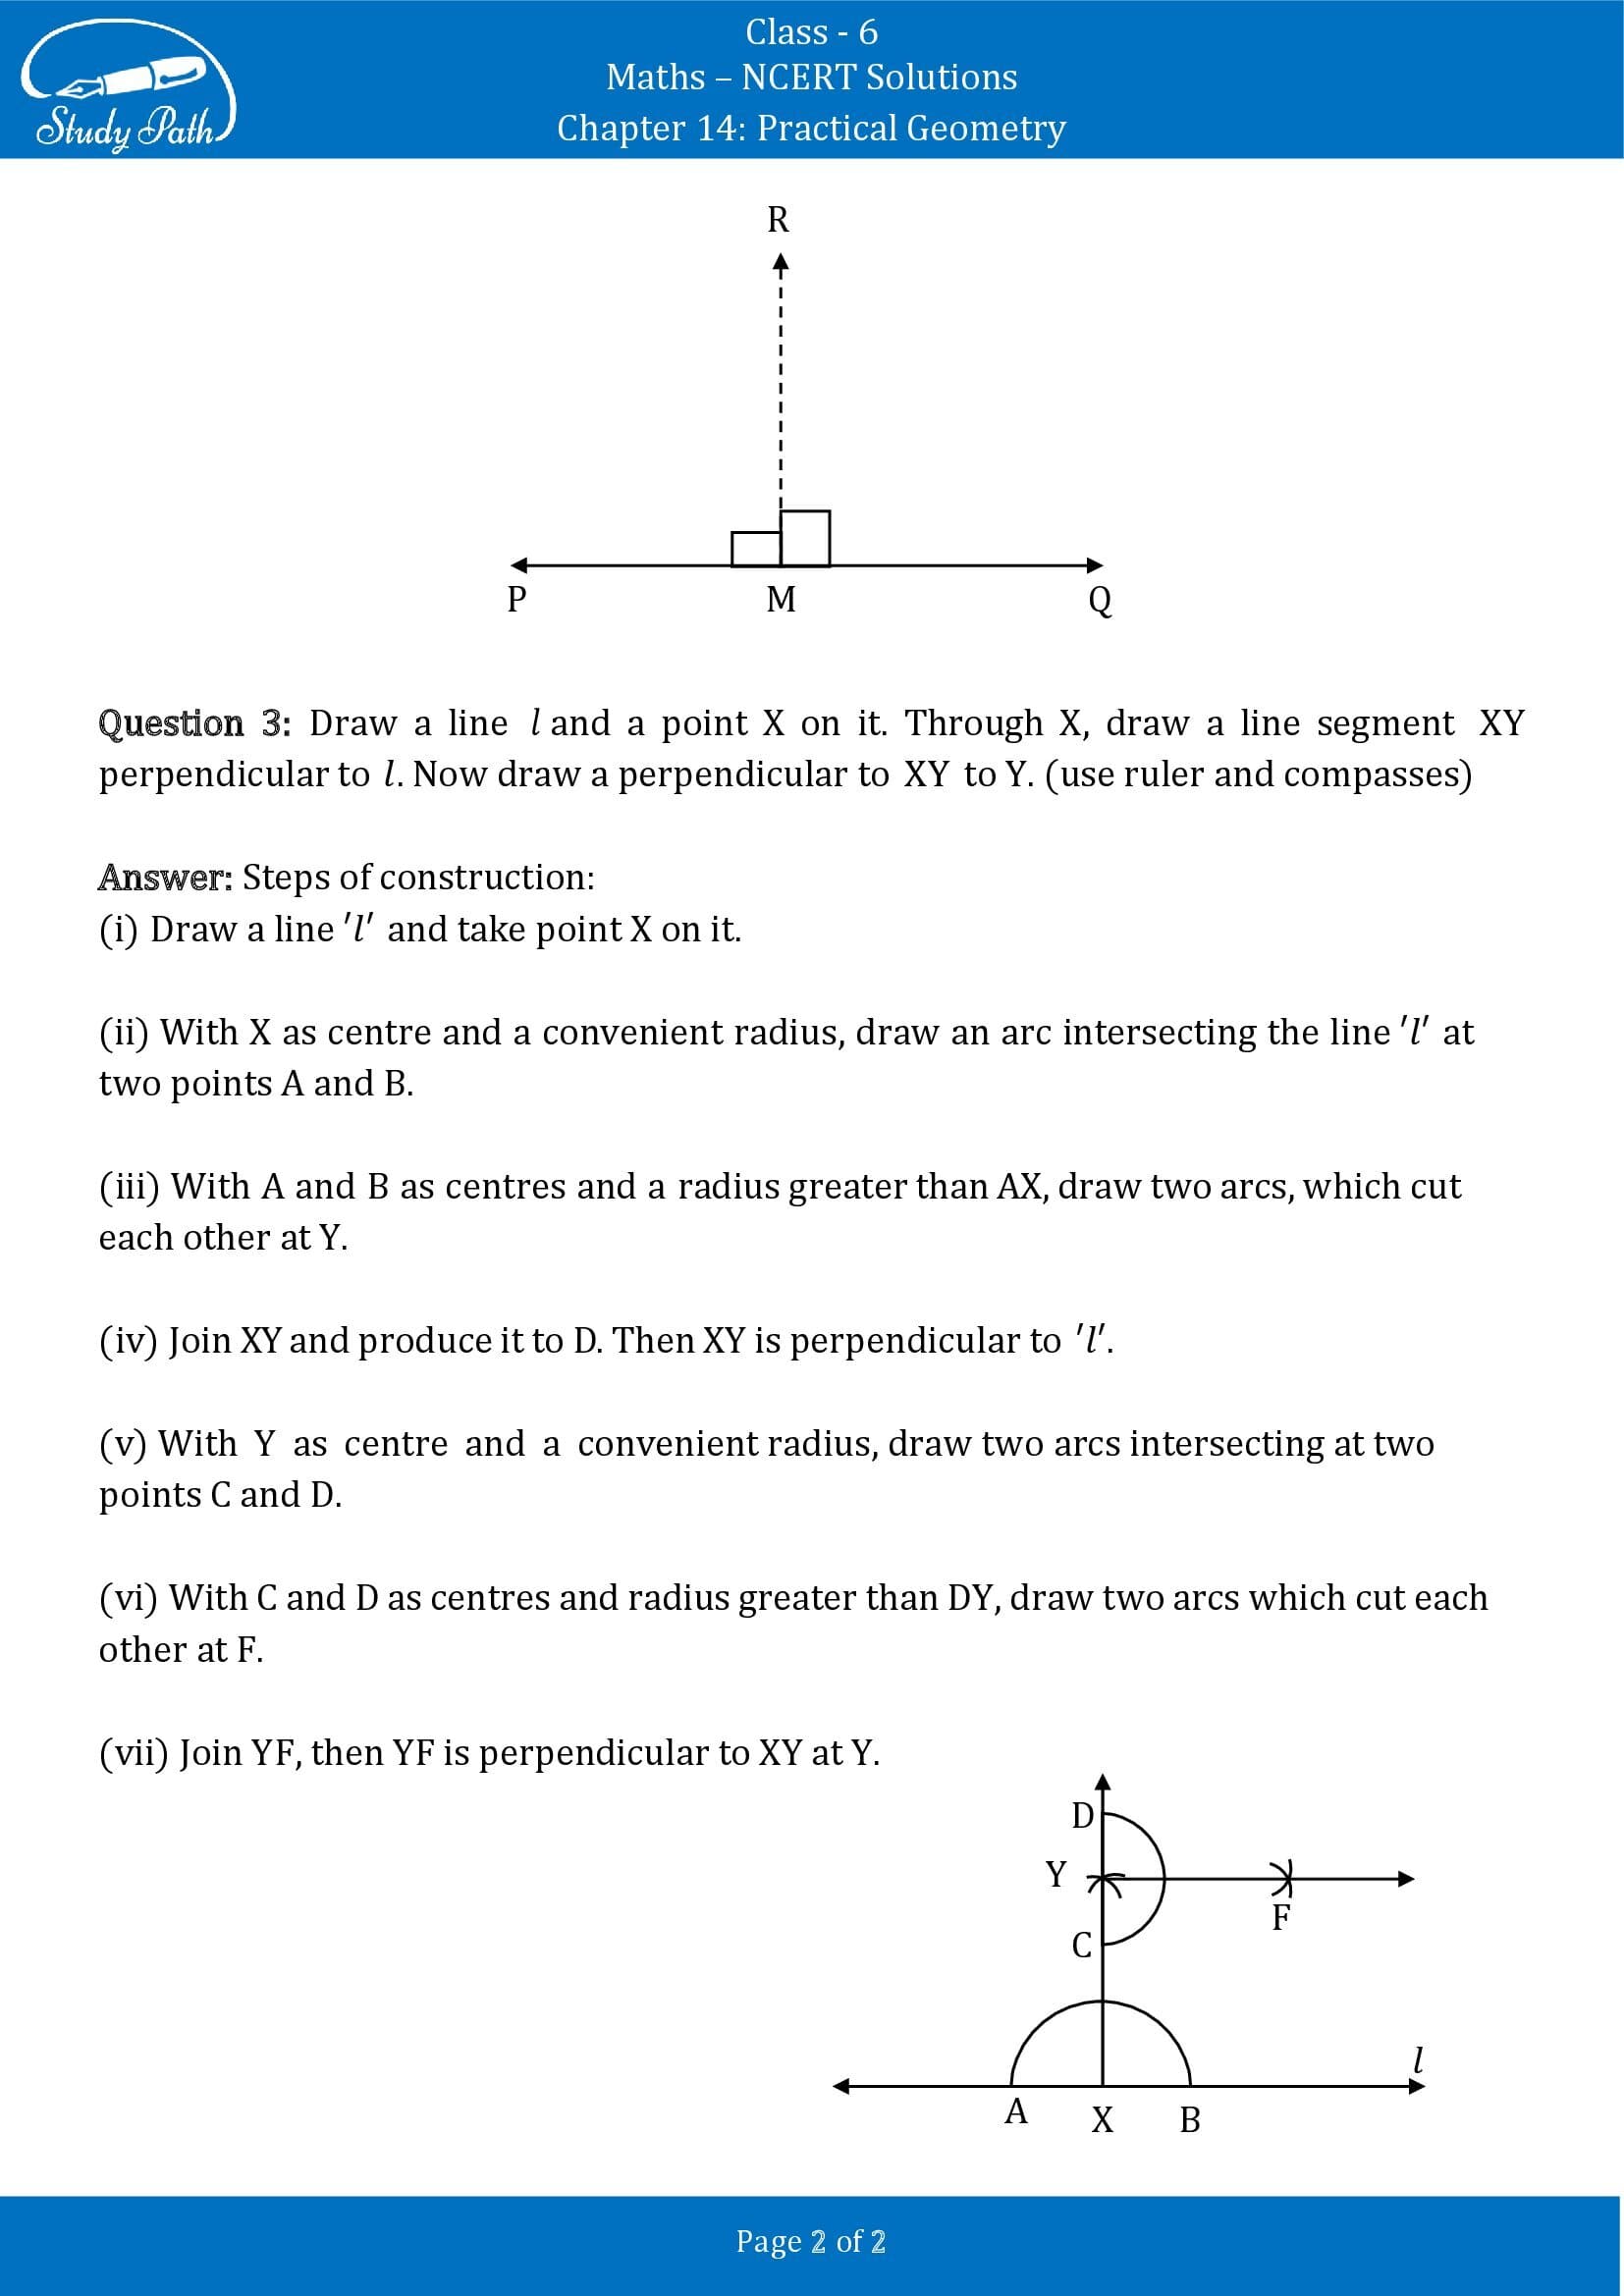 NCERT Solutions for Class 6 Maths Chapter 14 Practical Geometry Exercise 14.4 00002